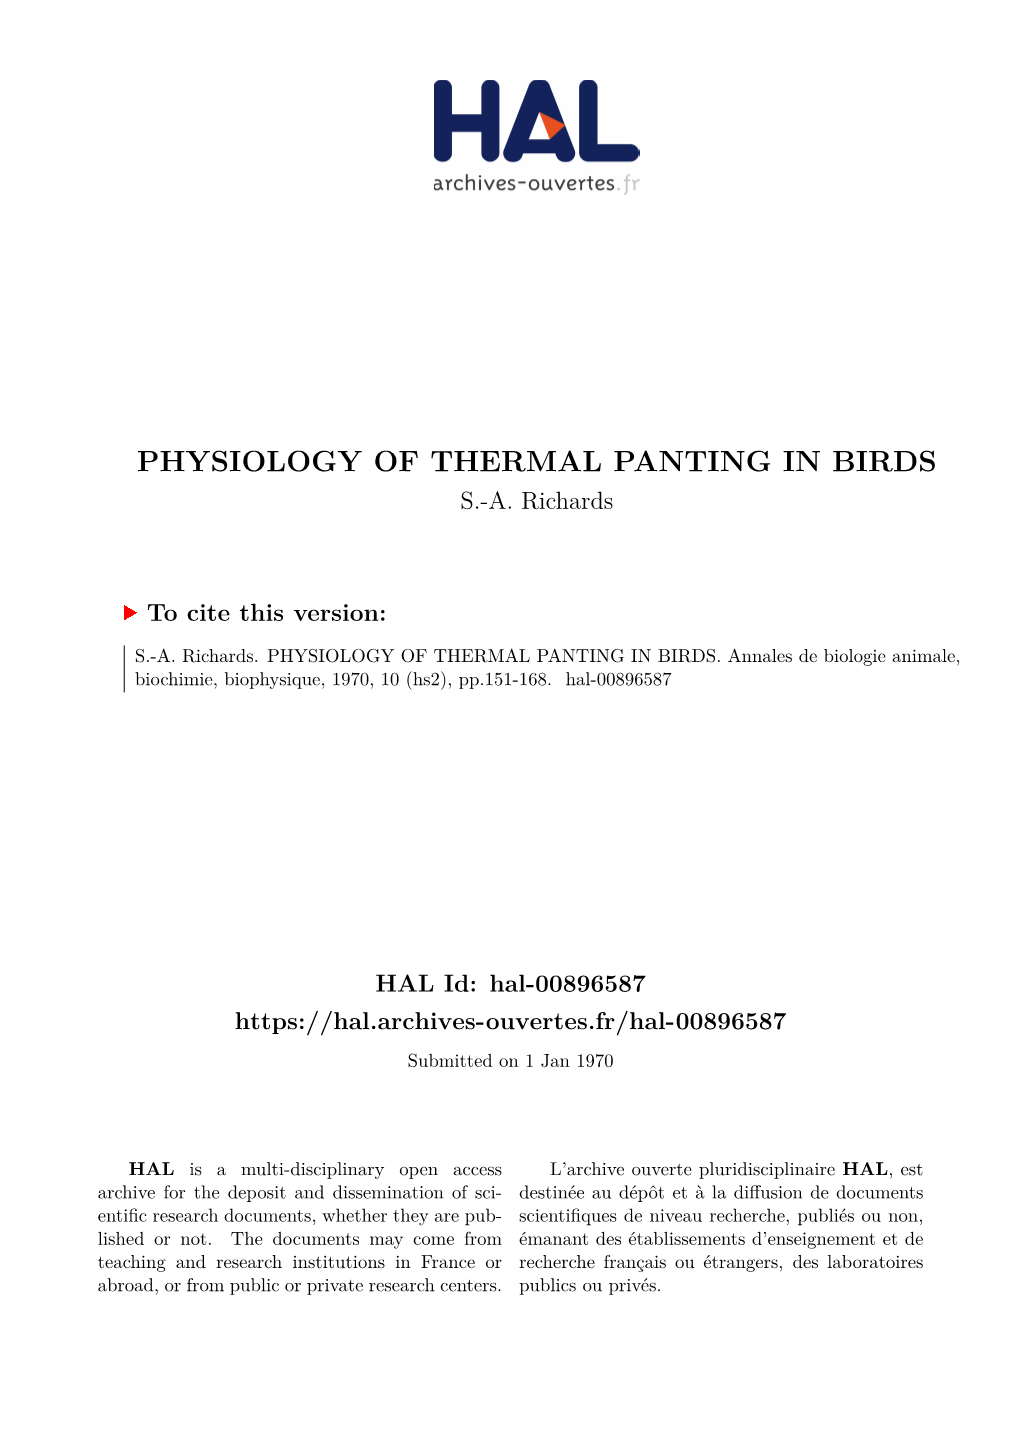 Physiology of Thermal Panting in Birds S.-A